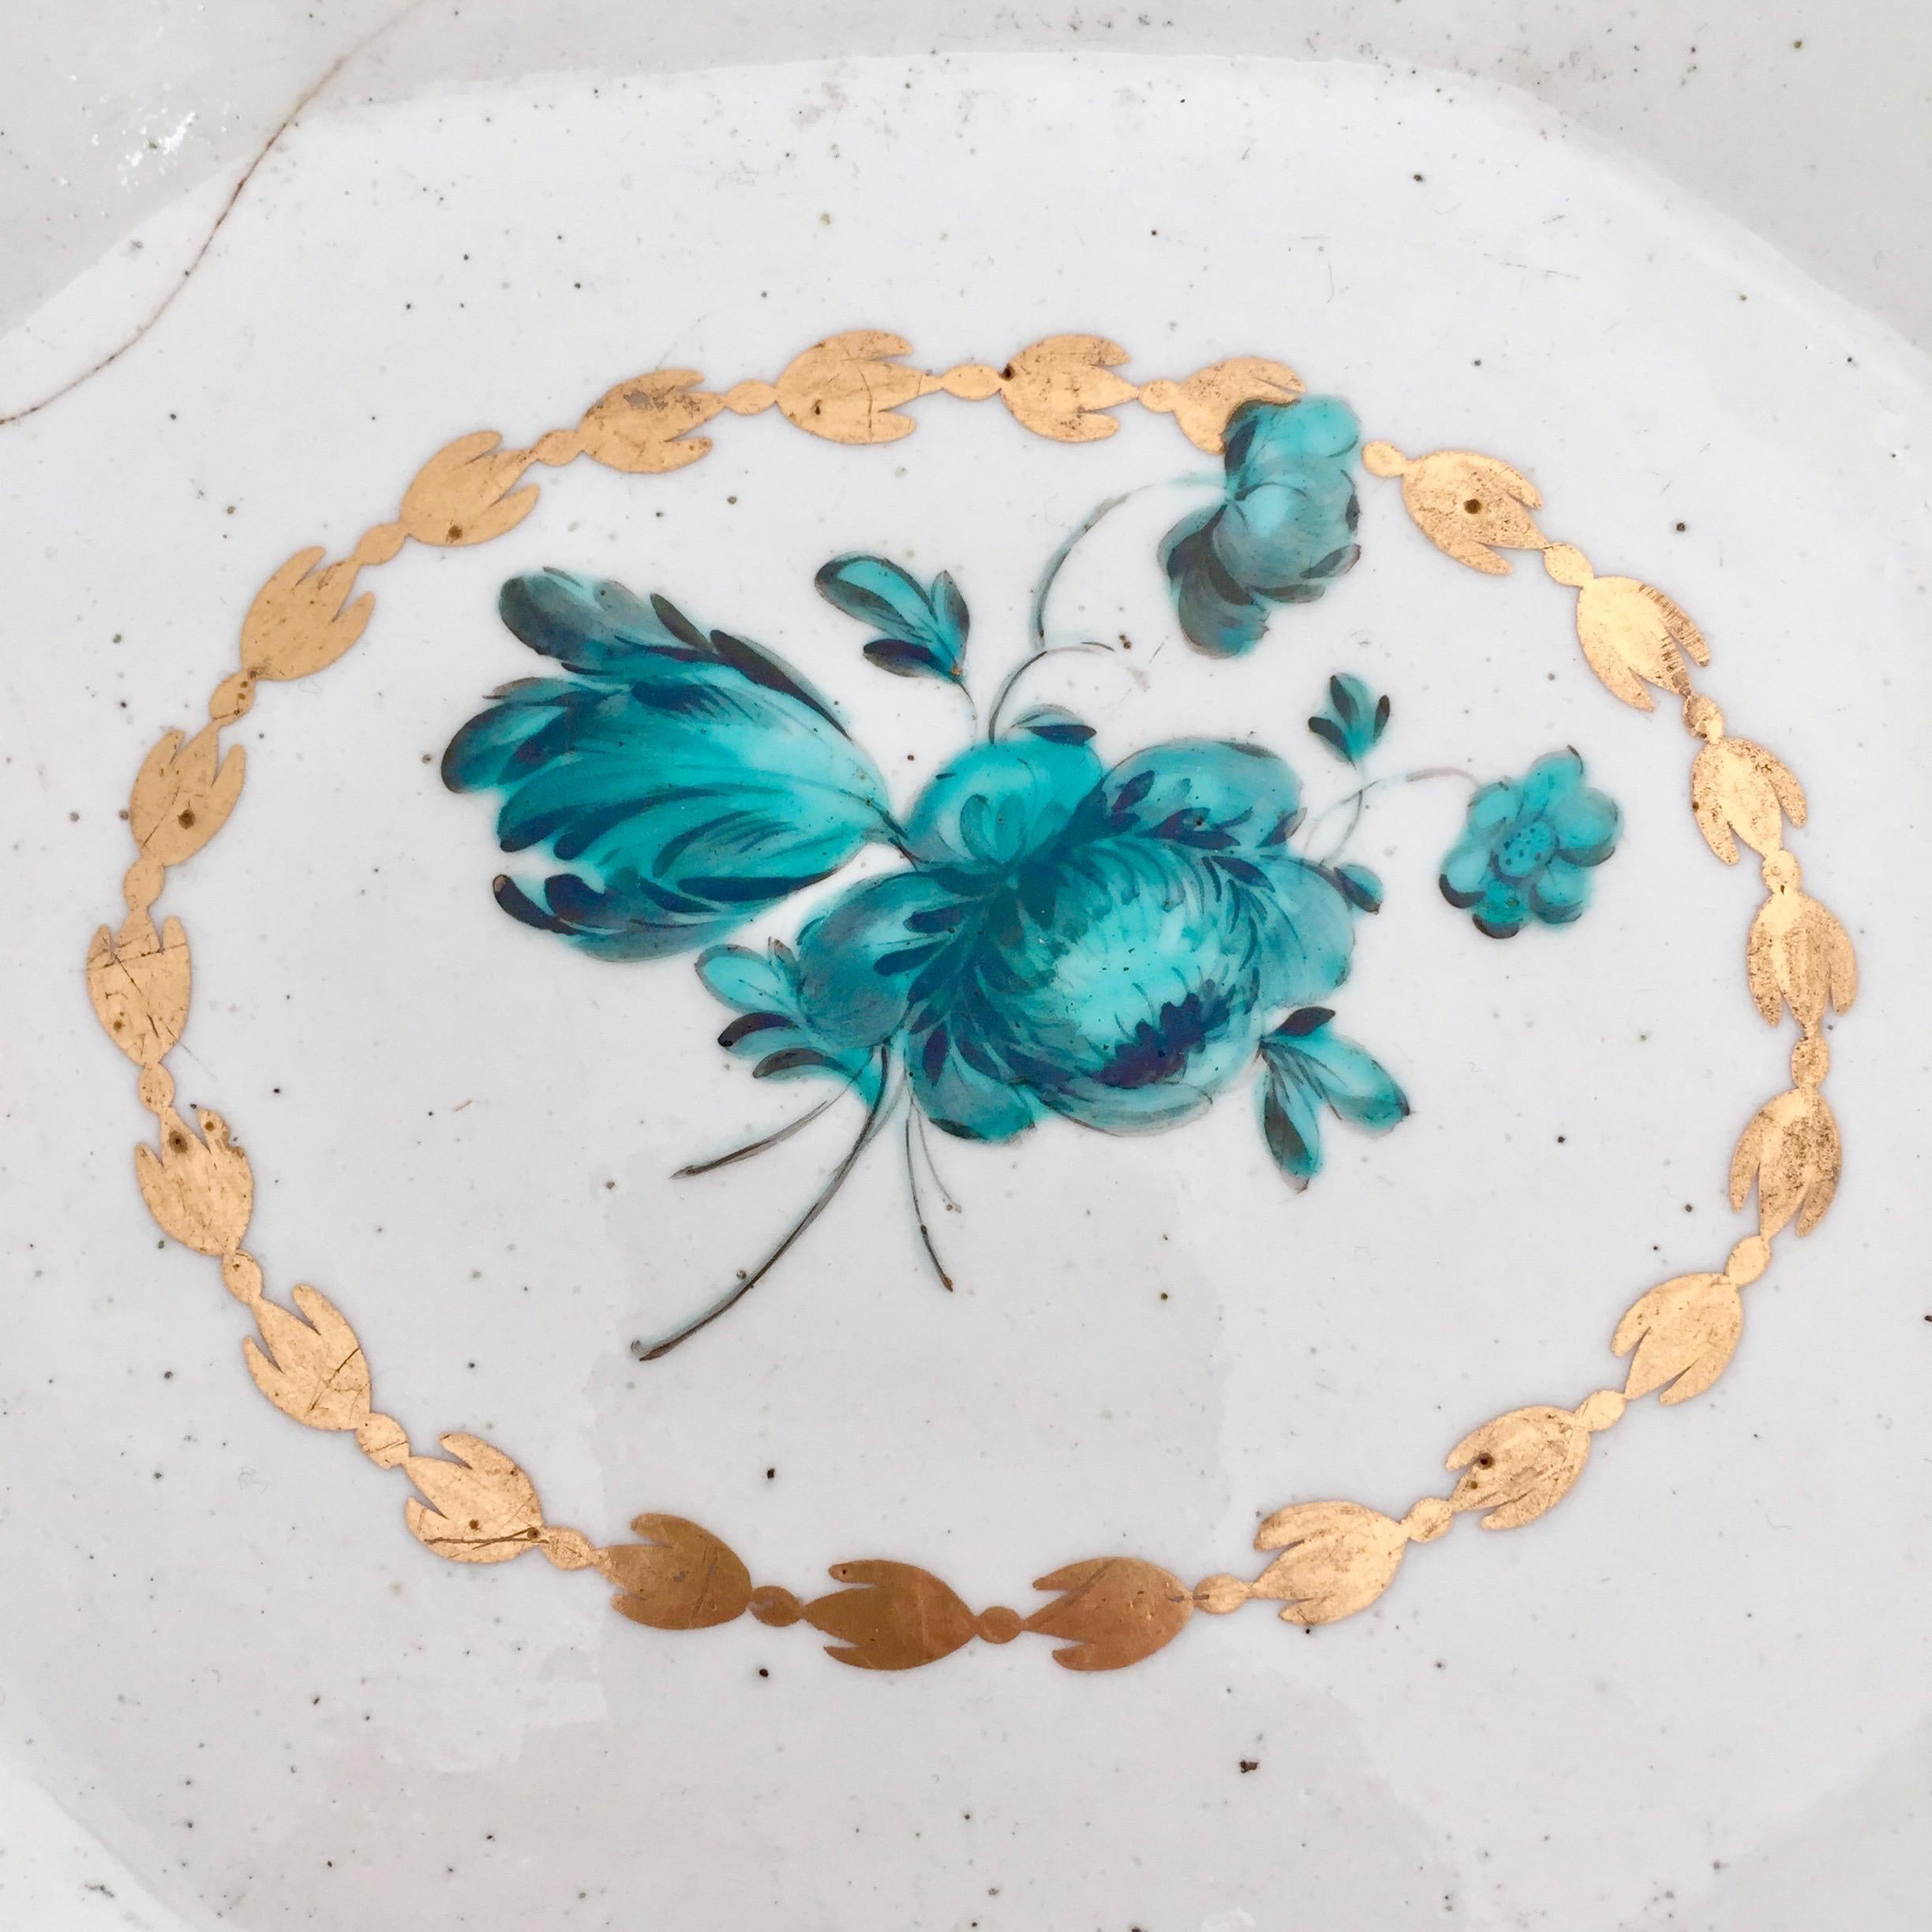 Hand-Painted Chelsea Porcelain Octagonal Dish, Teal Flowers J Giles, Puce Anchor, 1753-1758